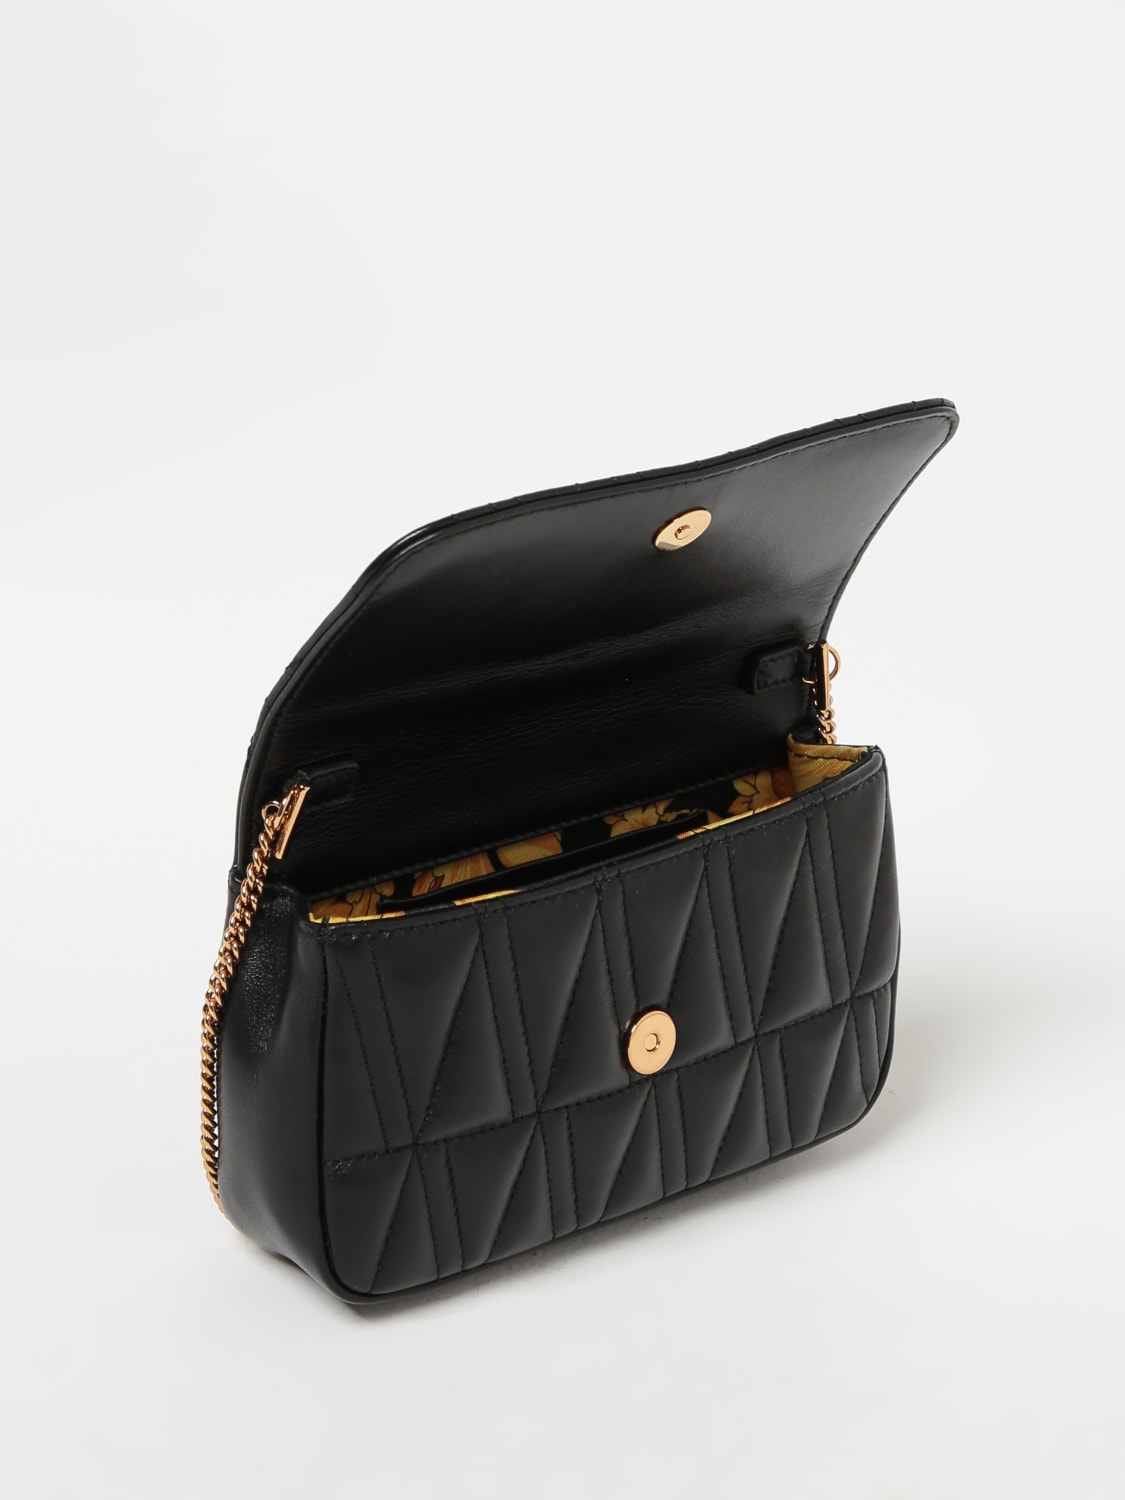 VERSACE VIRTUS QUILTED NAPPA LEATHER bag